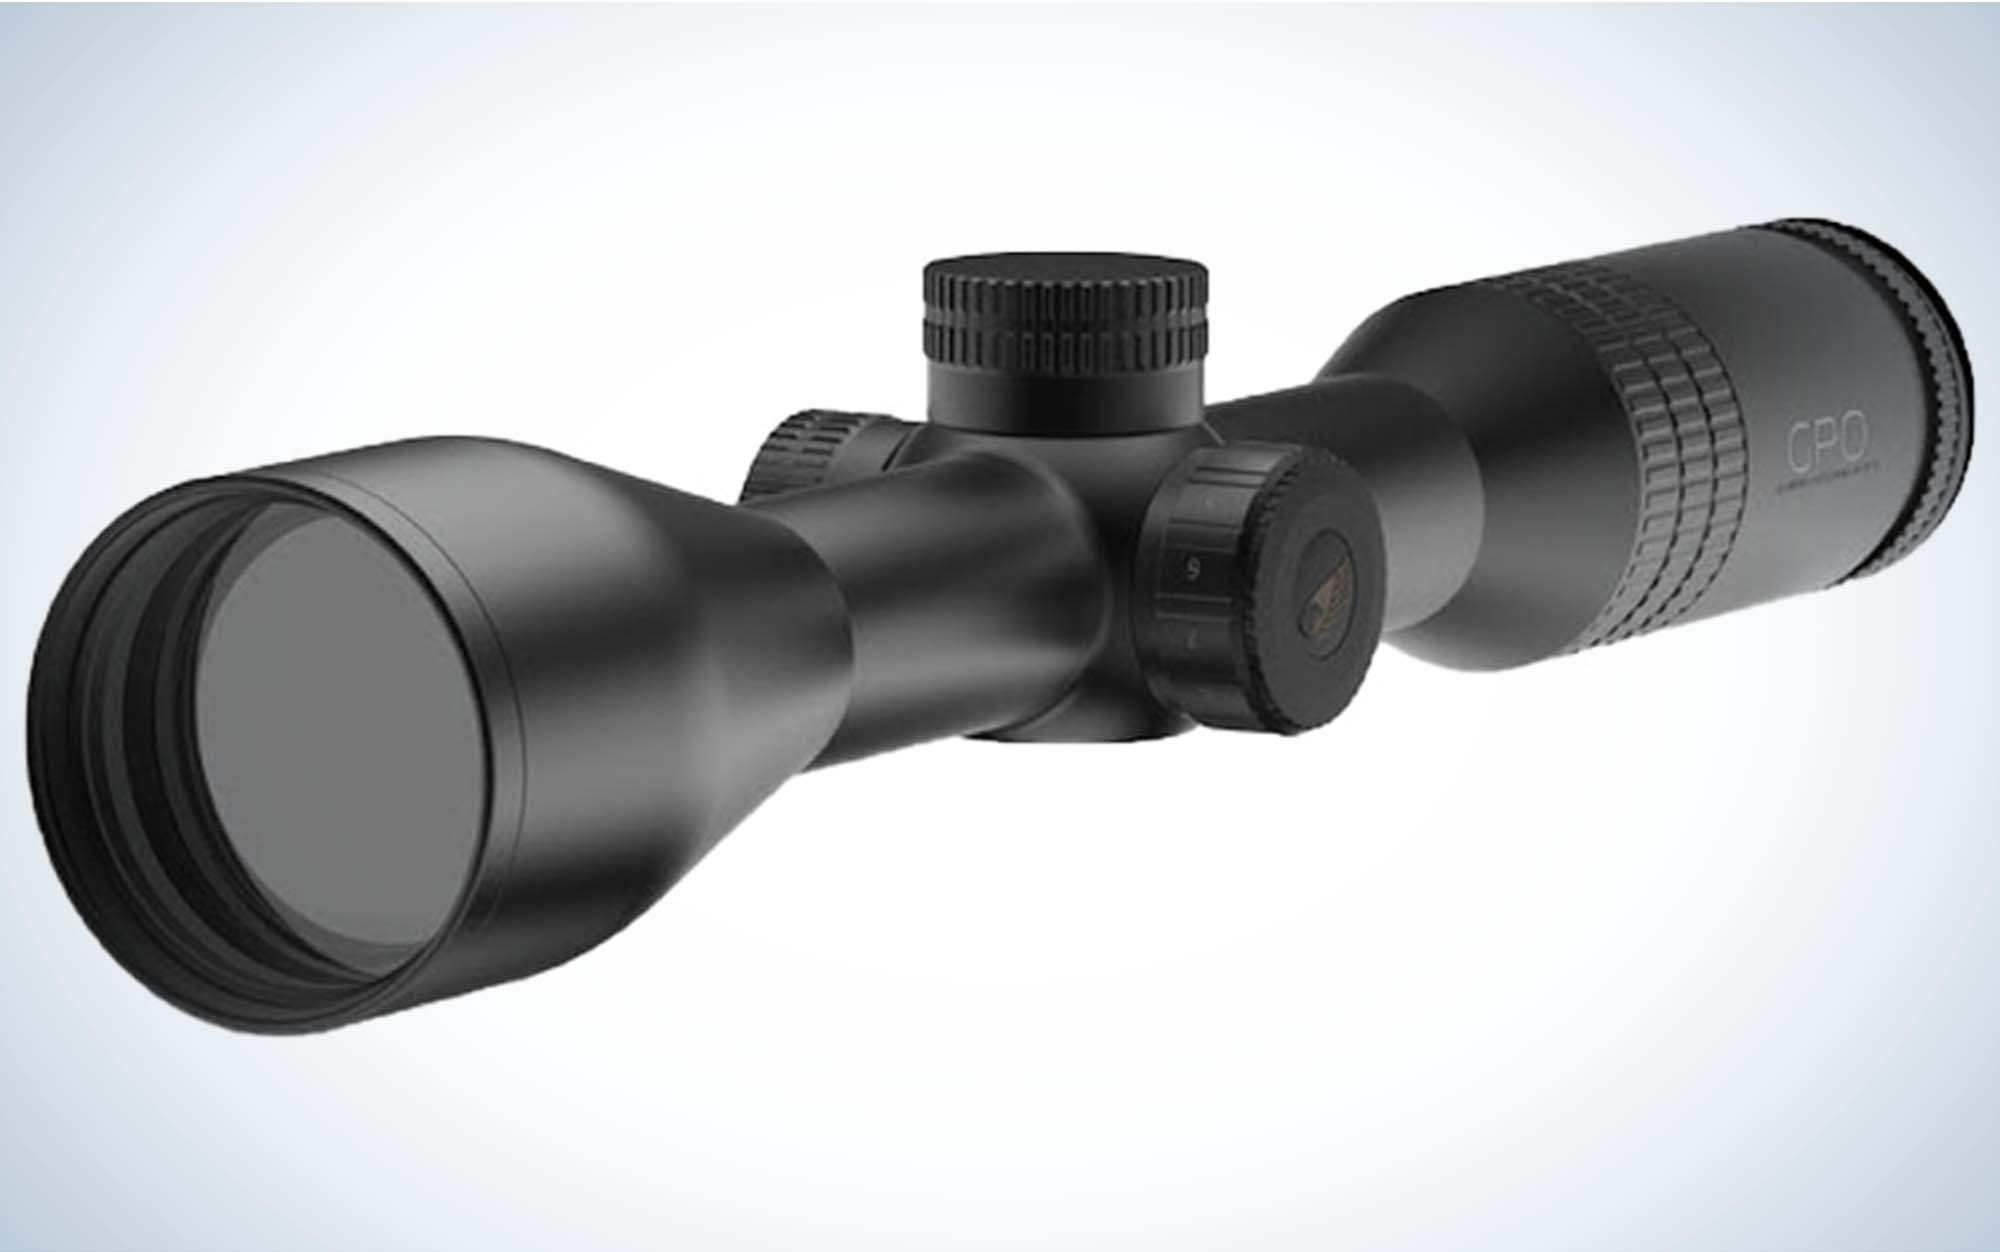 The GPO Spectra 7.5x50i is the best low-light rifle scope.